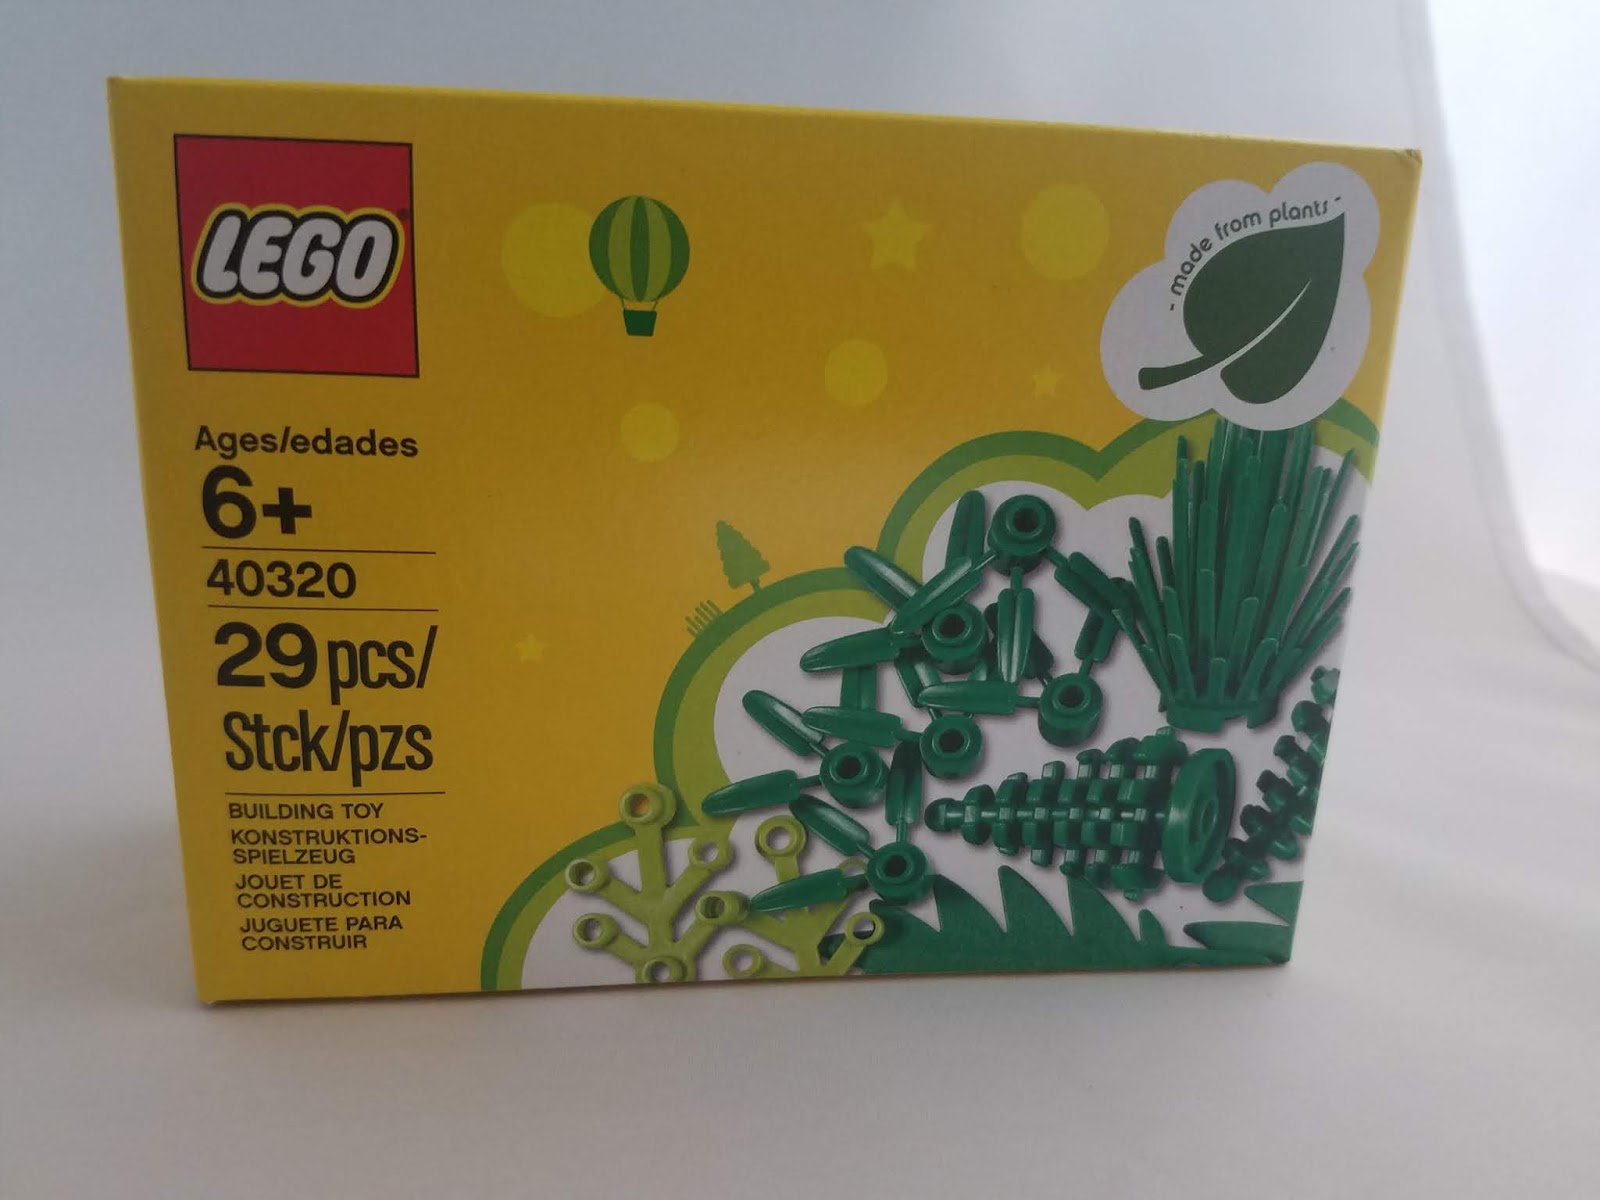 LEGO Exclusives Sets: 40320 Plants From Plants NEW-40320